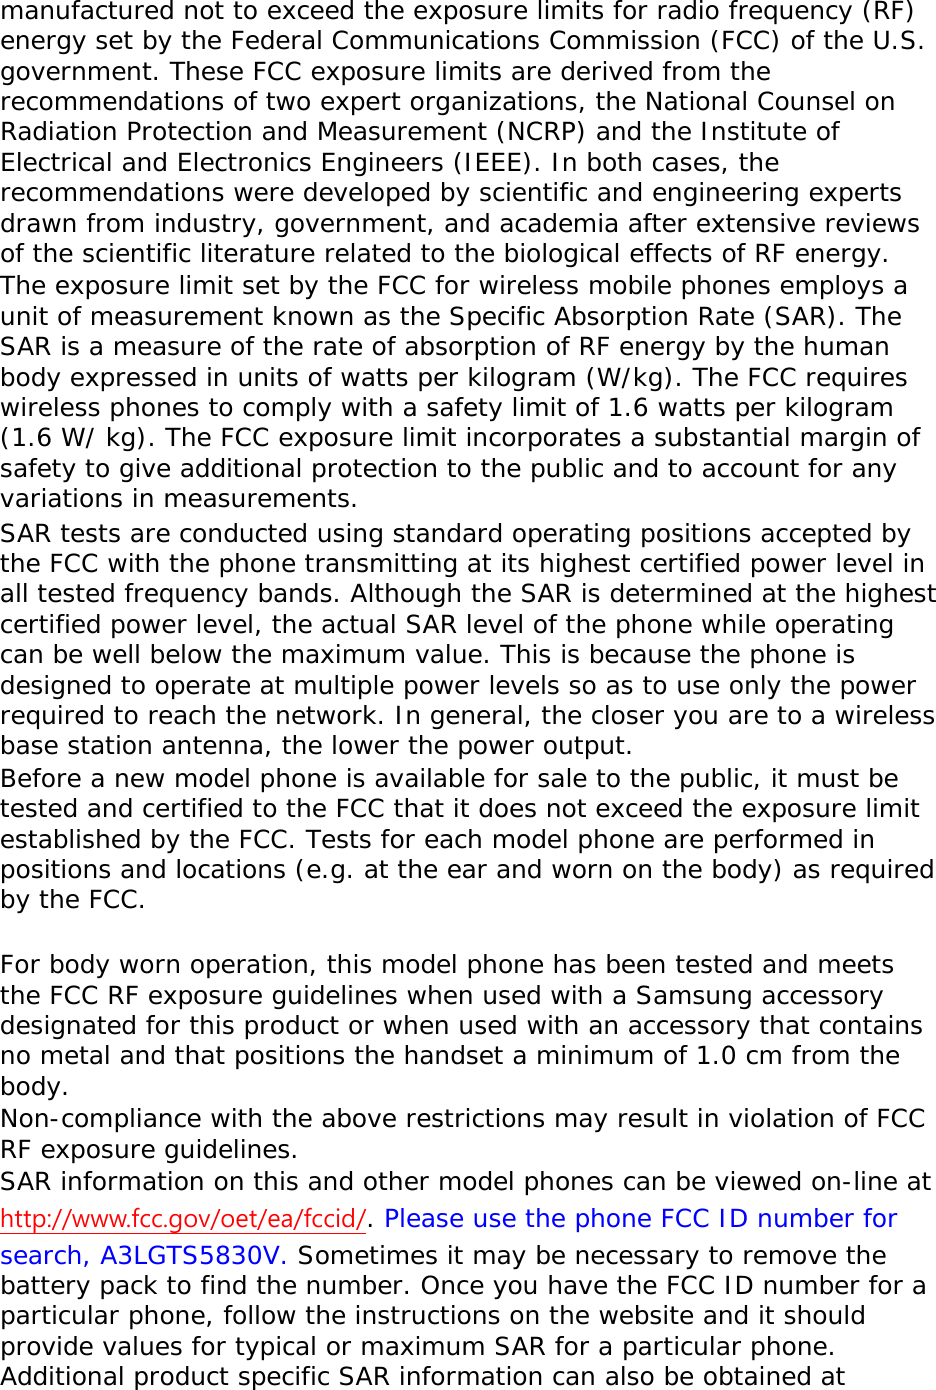 manufactured not to exceed the exposure limits for radio frequency (RF) energy set by the Federal Communications Commission (FCC) of the U.S. government. These FCC exposure limits are derived from the recommendations of two expert organizations, the National Counsel on Radiation Protection and Measurement (NCRP) and the Institute of Electrical and Electronics Engineers (IEEE). In both cases, the recommendations were developed by scientific and engineering experts drawn from industry, government, and academia after extensive reviews of the scientific literature related to the biological effects of RF energy. The exposure limit set by the FCC for wireless mobile phones employs a unit of measurement known as the Specific Absorption Rate (SAR). The SAR is a measure of the rate of absorption of RF energy by the human body expressed in units of watts per kilogram (W/kg). The FCC requires wireless phones to comply with a safety limit of 1.6 watts per kilogram (1.6 W/ kg). The FCC exposure limit incorporates a substantial margin of safety to give additional protection to the public and to account for any variations in measurements. SAR tests are conducted using standard operating positions accepted by the FCC with the phone transmitting at its highest certified power level in all tested frequency bands. Although the SAR is determined at the highest certified power level, the actual SAR level of the phone while operating can be well below the maximum value. This is because the phone is designed to operate at multiple power levels so as to use only the power required to reach the network. In general, the closer you are to a wireless base station antenna, the lower the power output. Before a new model phone is available for sale to the public, it must be tested and certified to the FCC that it does not exceed the exposure limit established by the FCC. Tests for each model phone are performed in positions and locations (e.g. at the ear and worn on the body) as required by the FCC.    For body worn operation, this model phone has been tested and meets the FCC RF exposure guidelines when used with a Samsung accessory designated for this product or when used with an accessory that contains no metal and that positions the handset a minimum of 1.0 cm from the body.  Non-compliance with the above restrictions may result in violation of FCC RF exposure guidelines. SAR information on this and other model phones can be viewed on-line at http://www.fcc.gov/oet/ea/fccid/. Please use the phone FCC ID number for search, A3LGTS5830V. Sometimes it may be necessary to remove the battery pack to find the number. Once you have the FCC ID number for a particular phone, follow the instructions on the website and it should provide values for typical or maximum SAR for a particular phone. Additional product specific SAR information can also be obtained at 